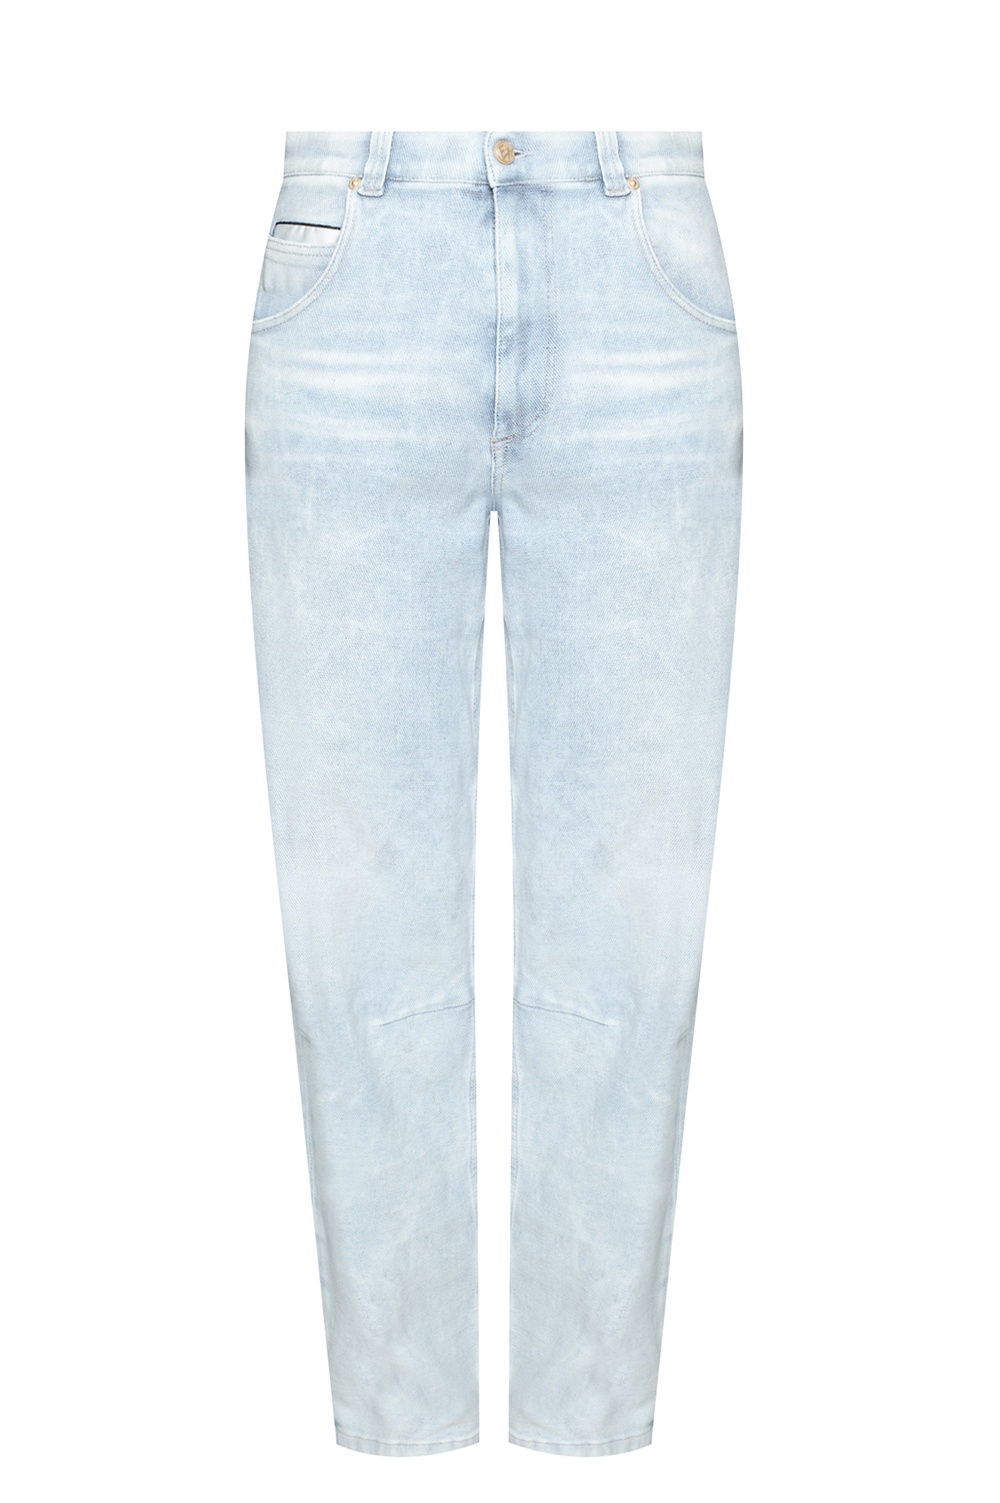 tæmme alkove analog Patched jeans Eytys - IicfShops US